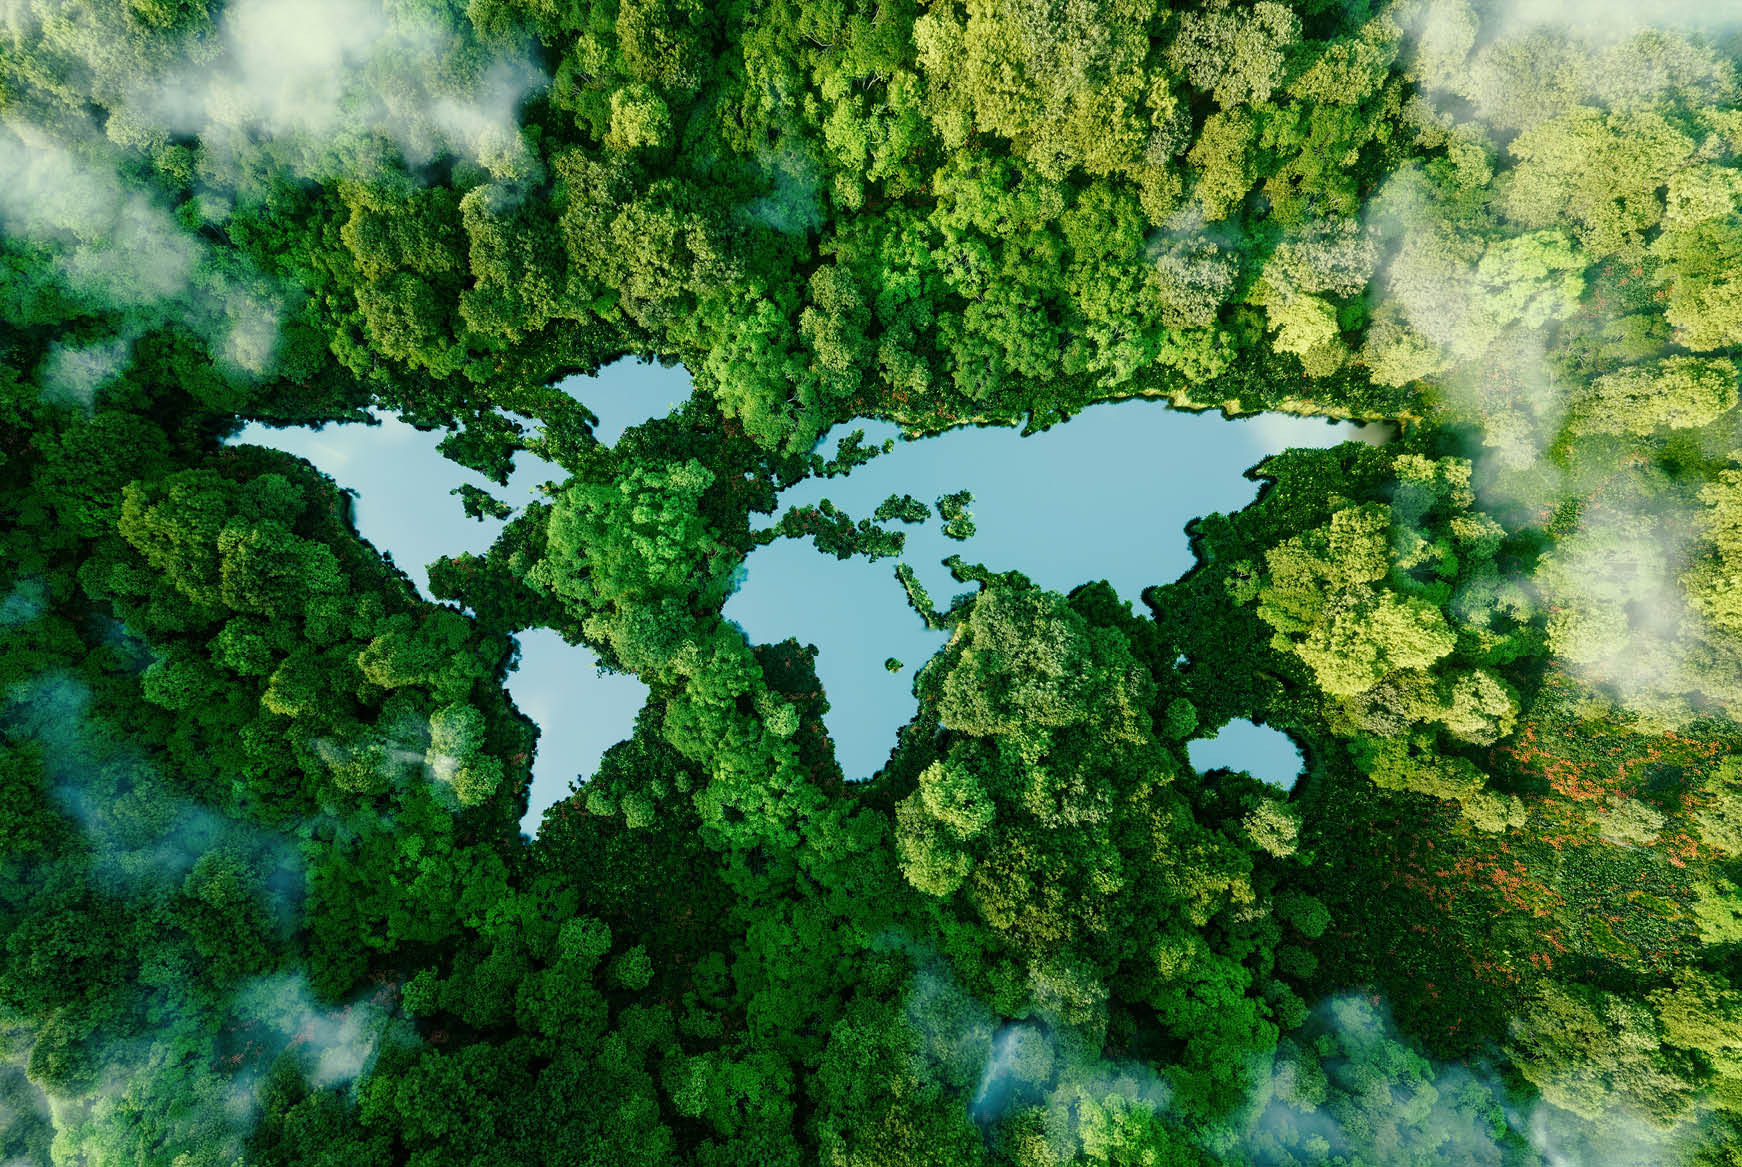 Earth map on a cloudy green forest background